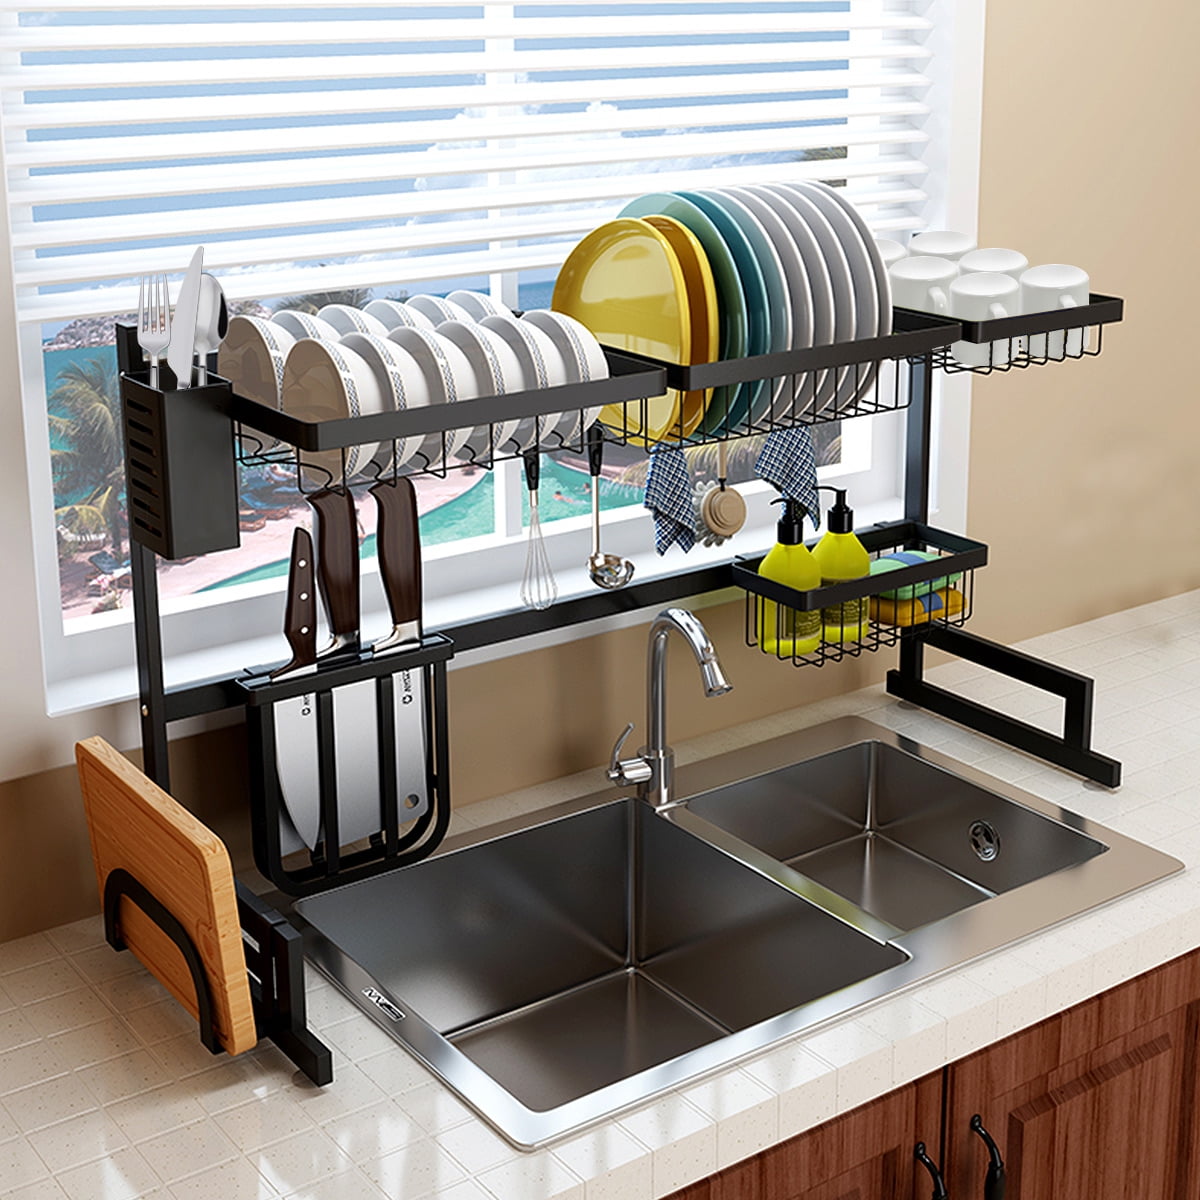 Dish Rack Over The Sink Dish Drying Rack Holder Drainer Organize-Stainless Steel 